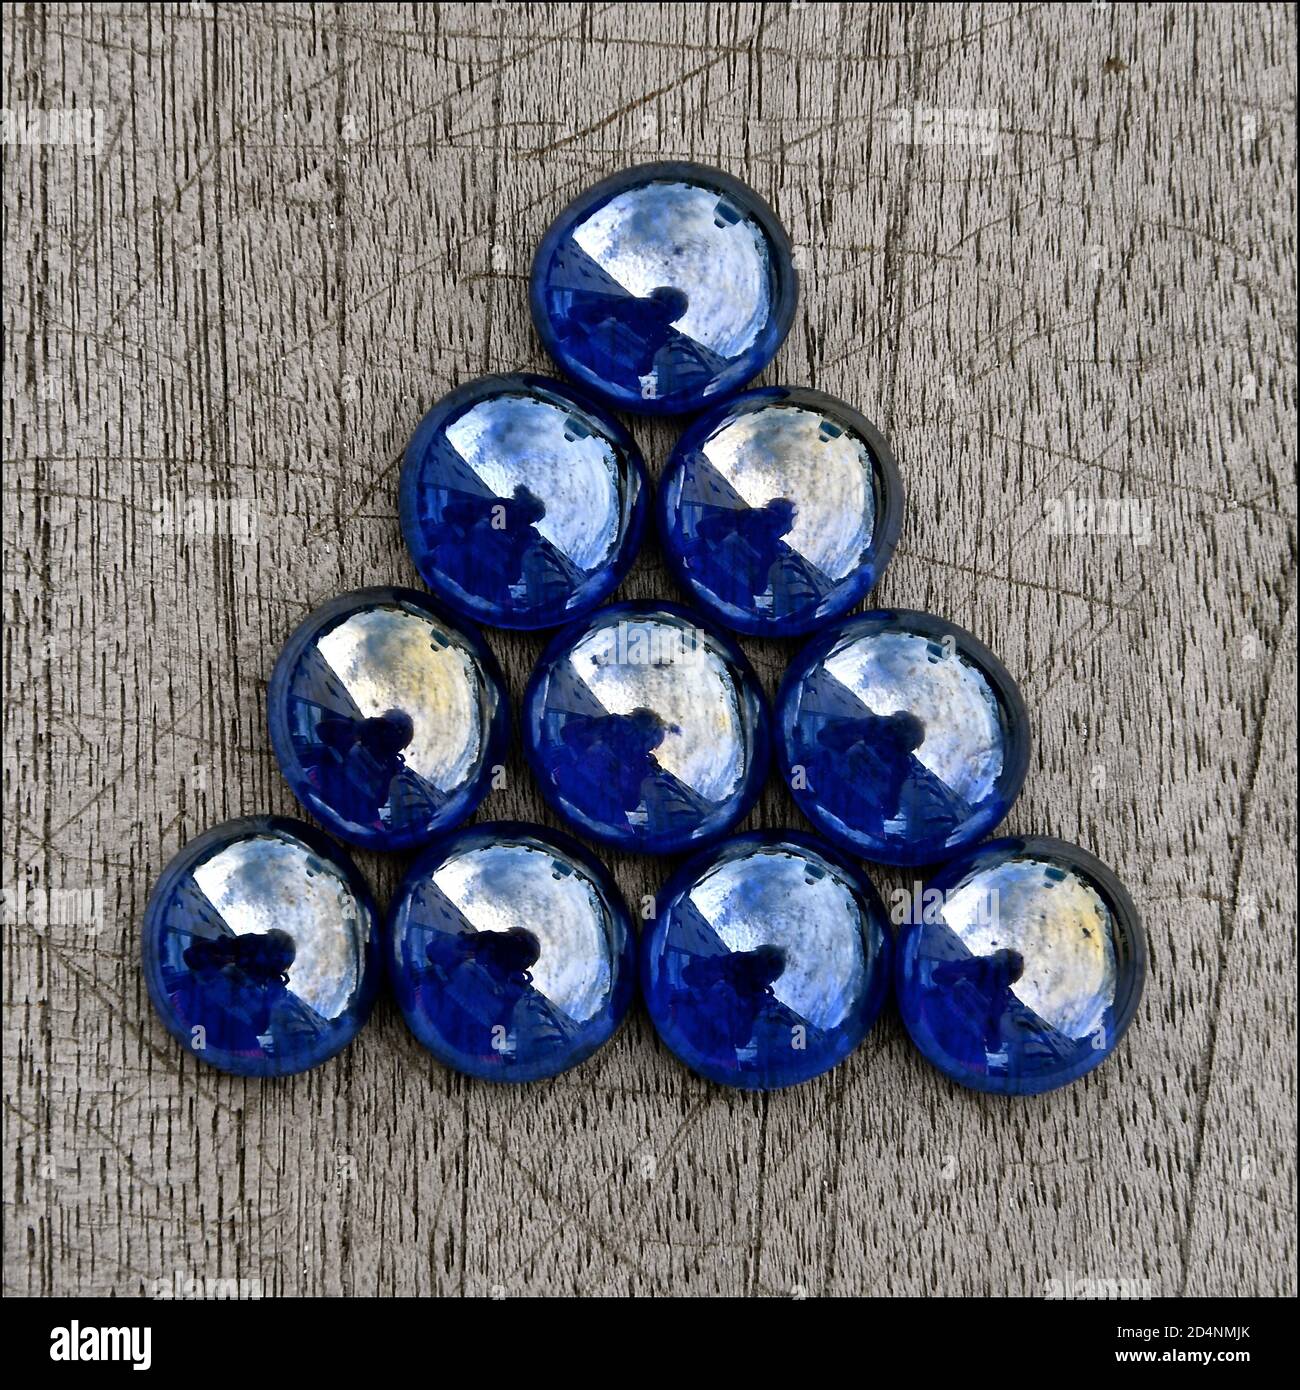 Triangle of iridescent blue glass beads isolated on a rustic wooden background Stock Photo